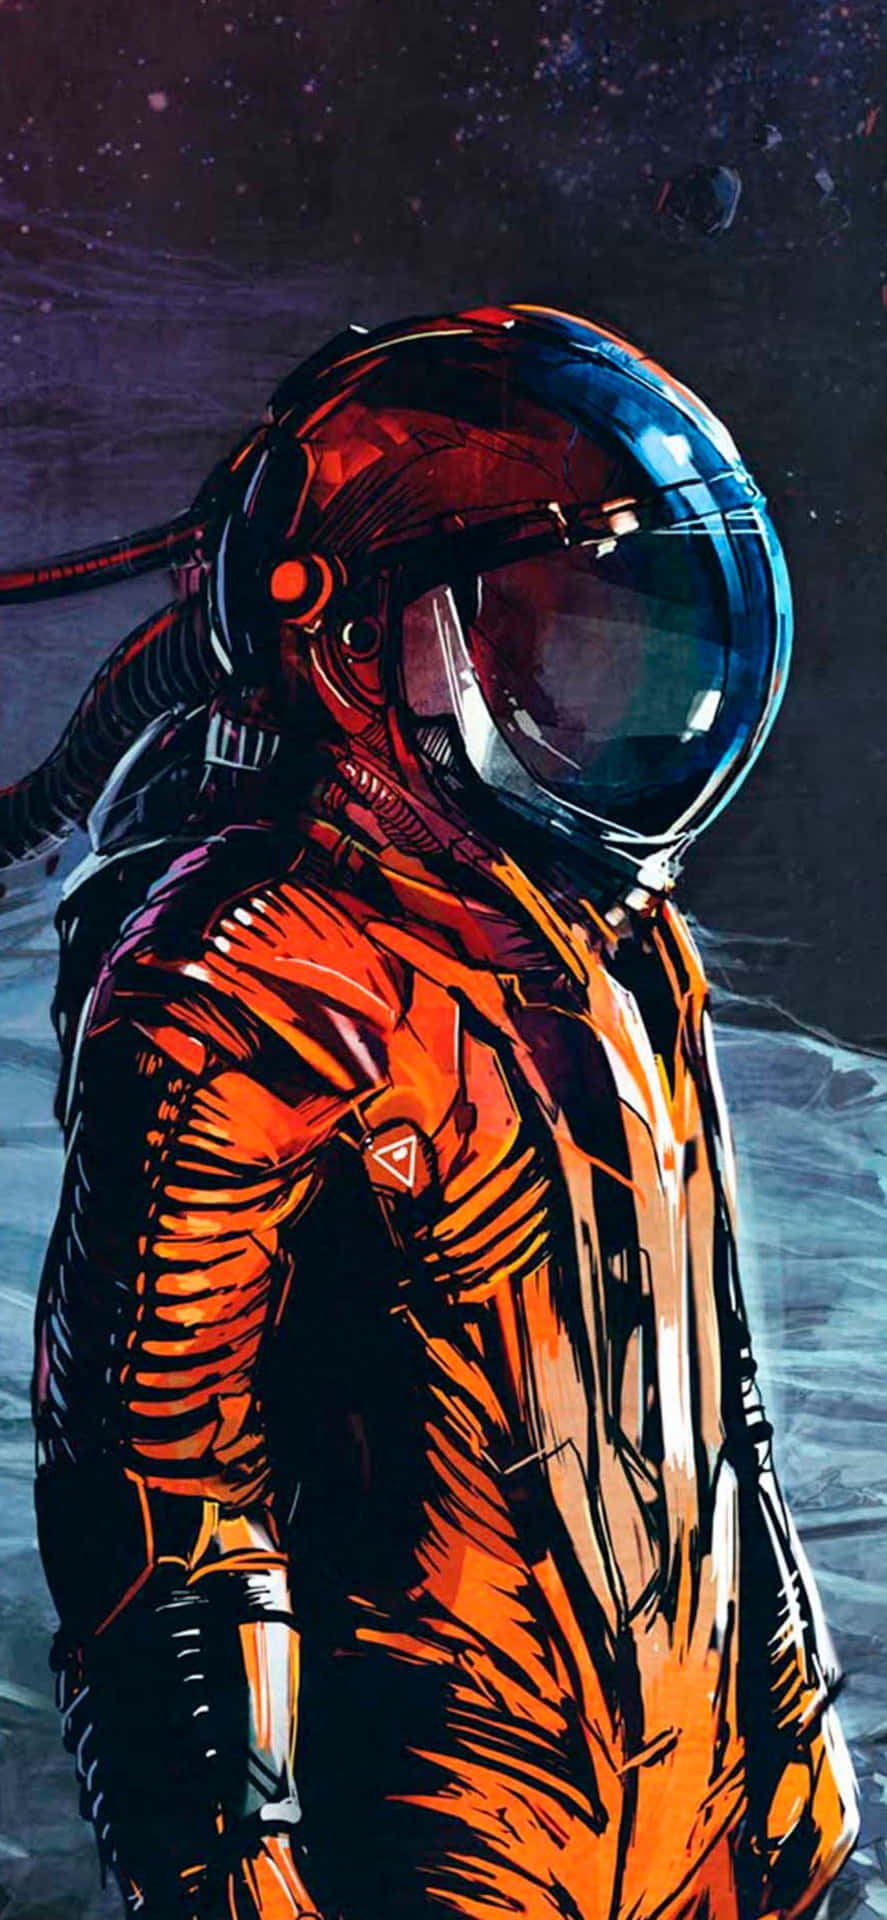 Feeling out of this world? Check out the Astronaut iPhone! Wallpaper